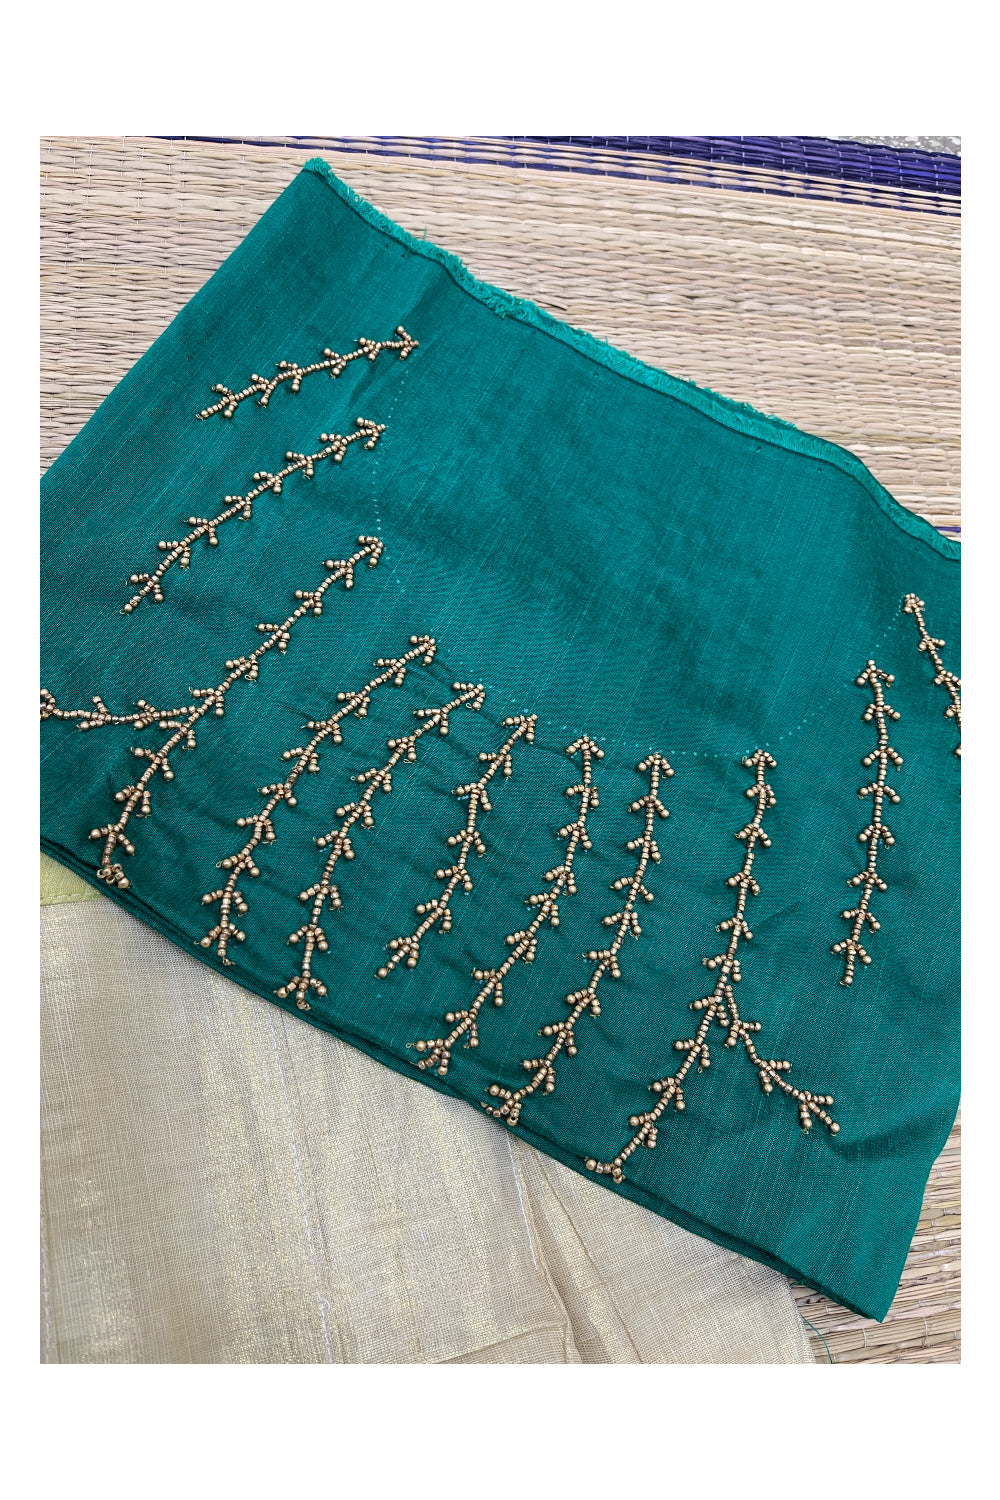 Semi Stitched Pavada Blouse with Tissue and Green Bead Works